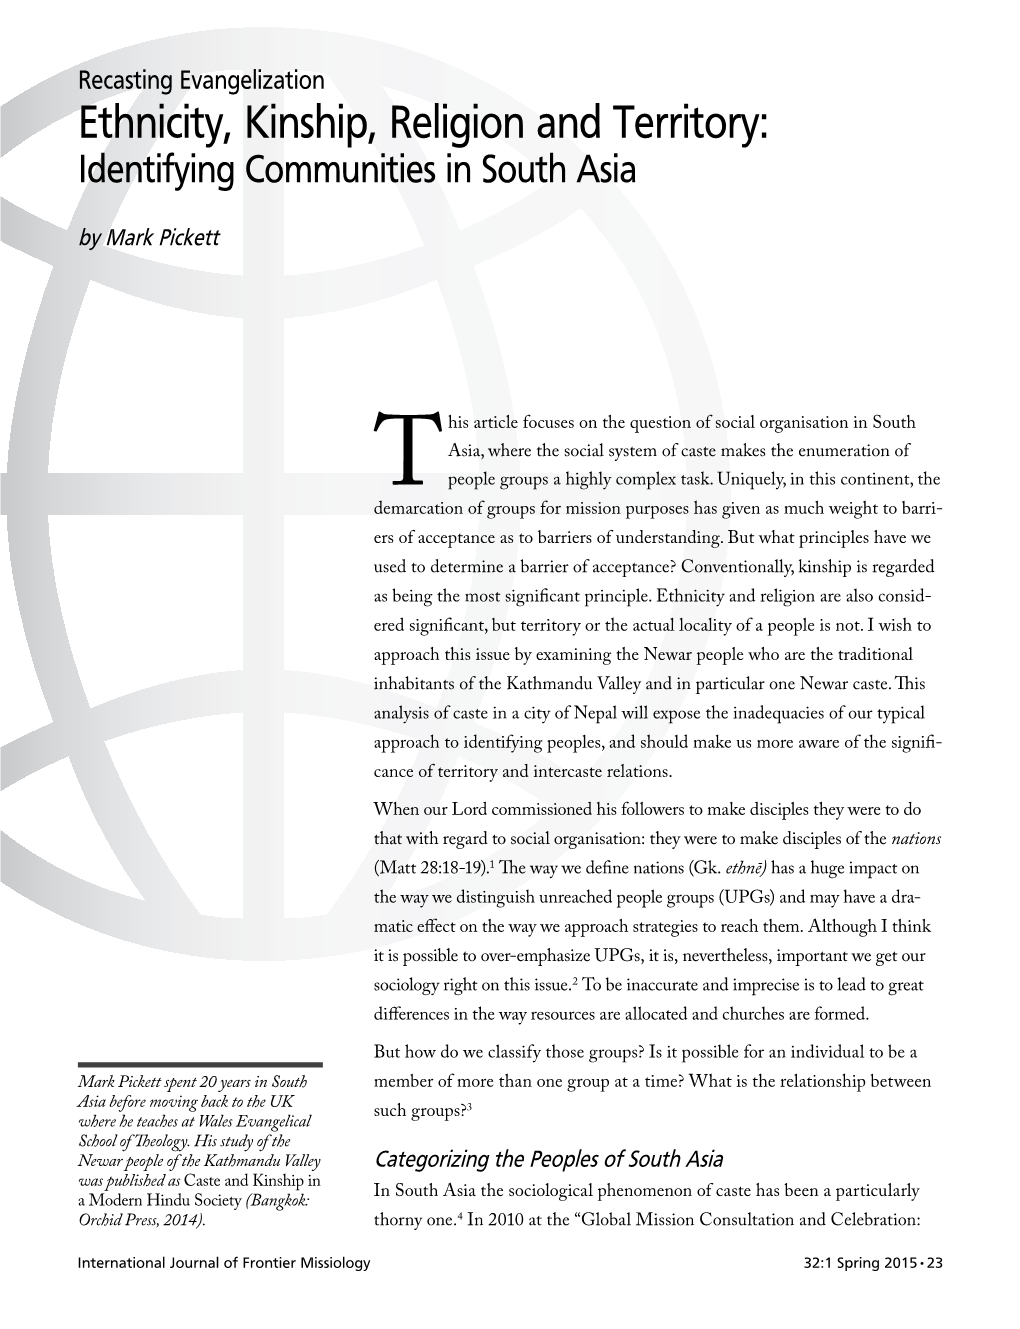 Ethnicity, Kinship, Religion and Territory: Identifying Communities in South Asia by Mark Pickett